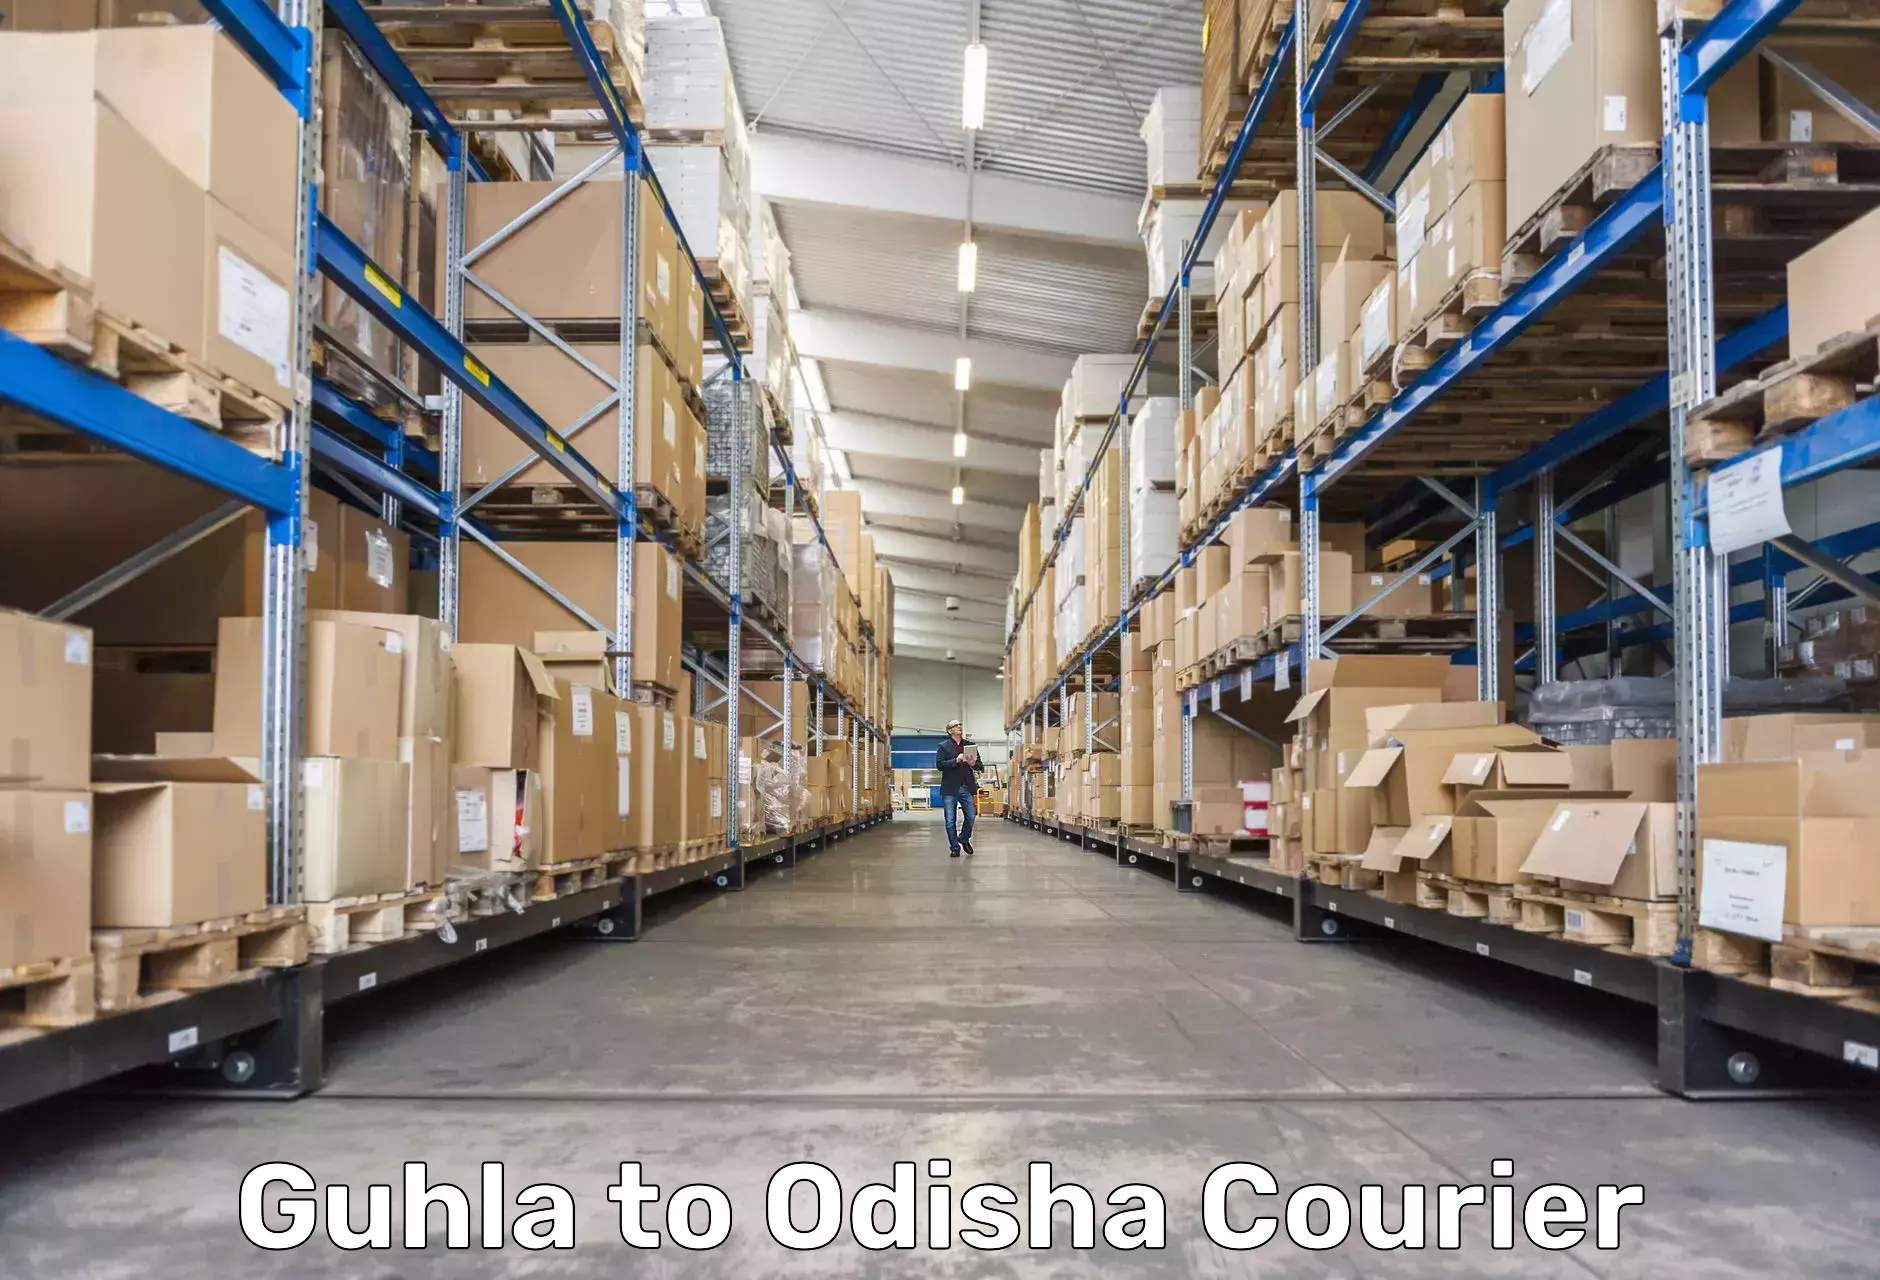 Express delivery capabilities in Guhla to Odisha